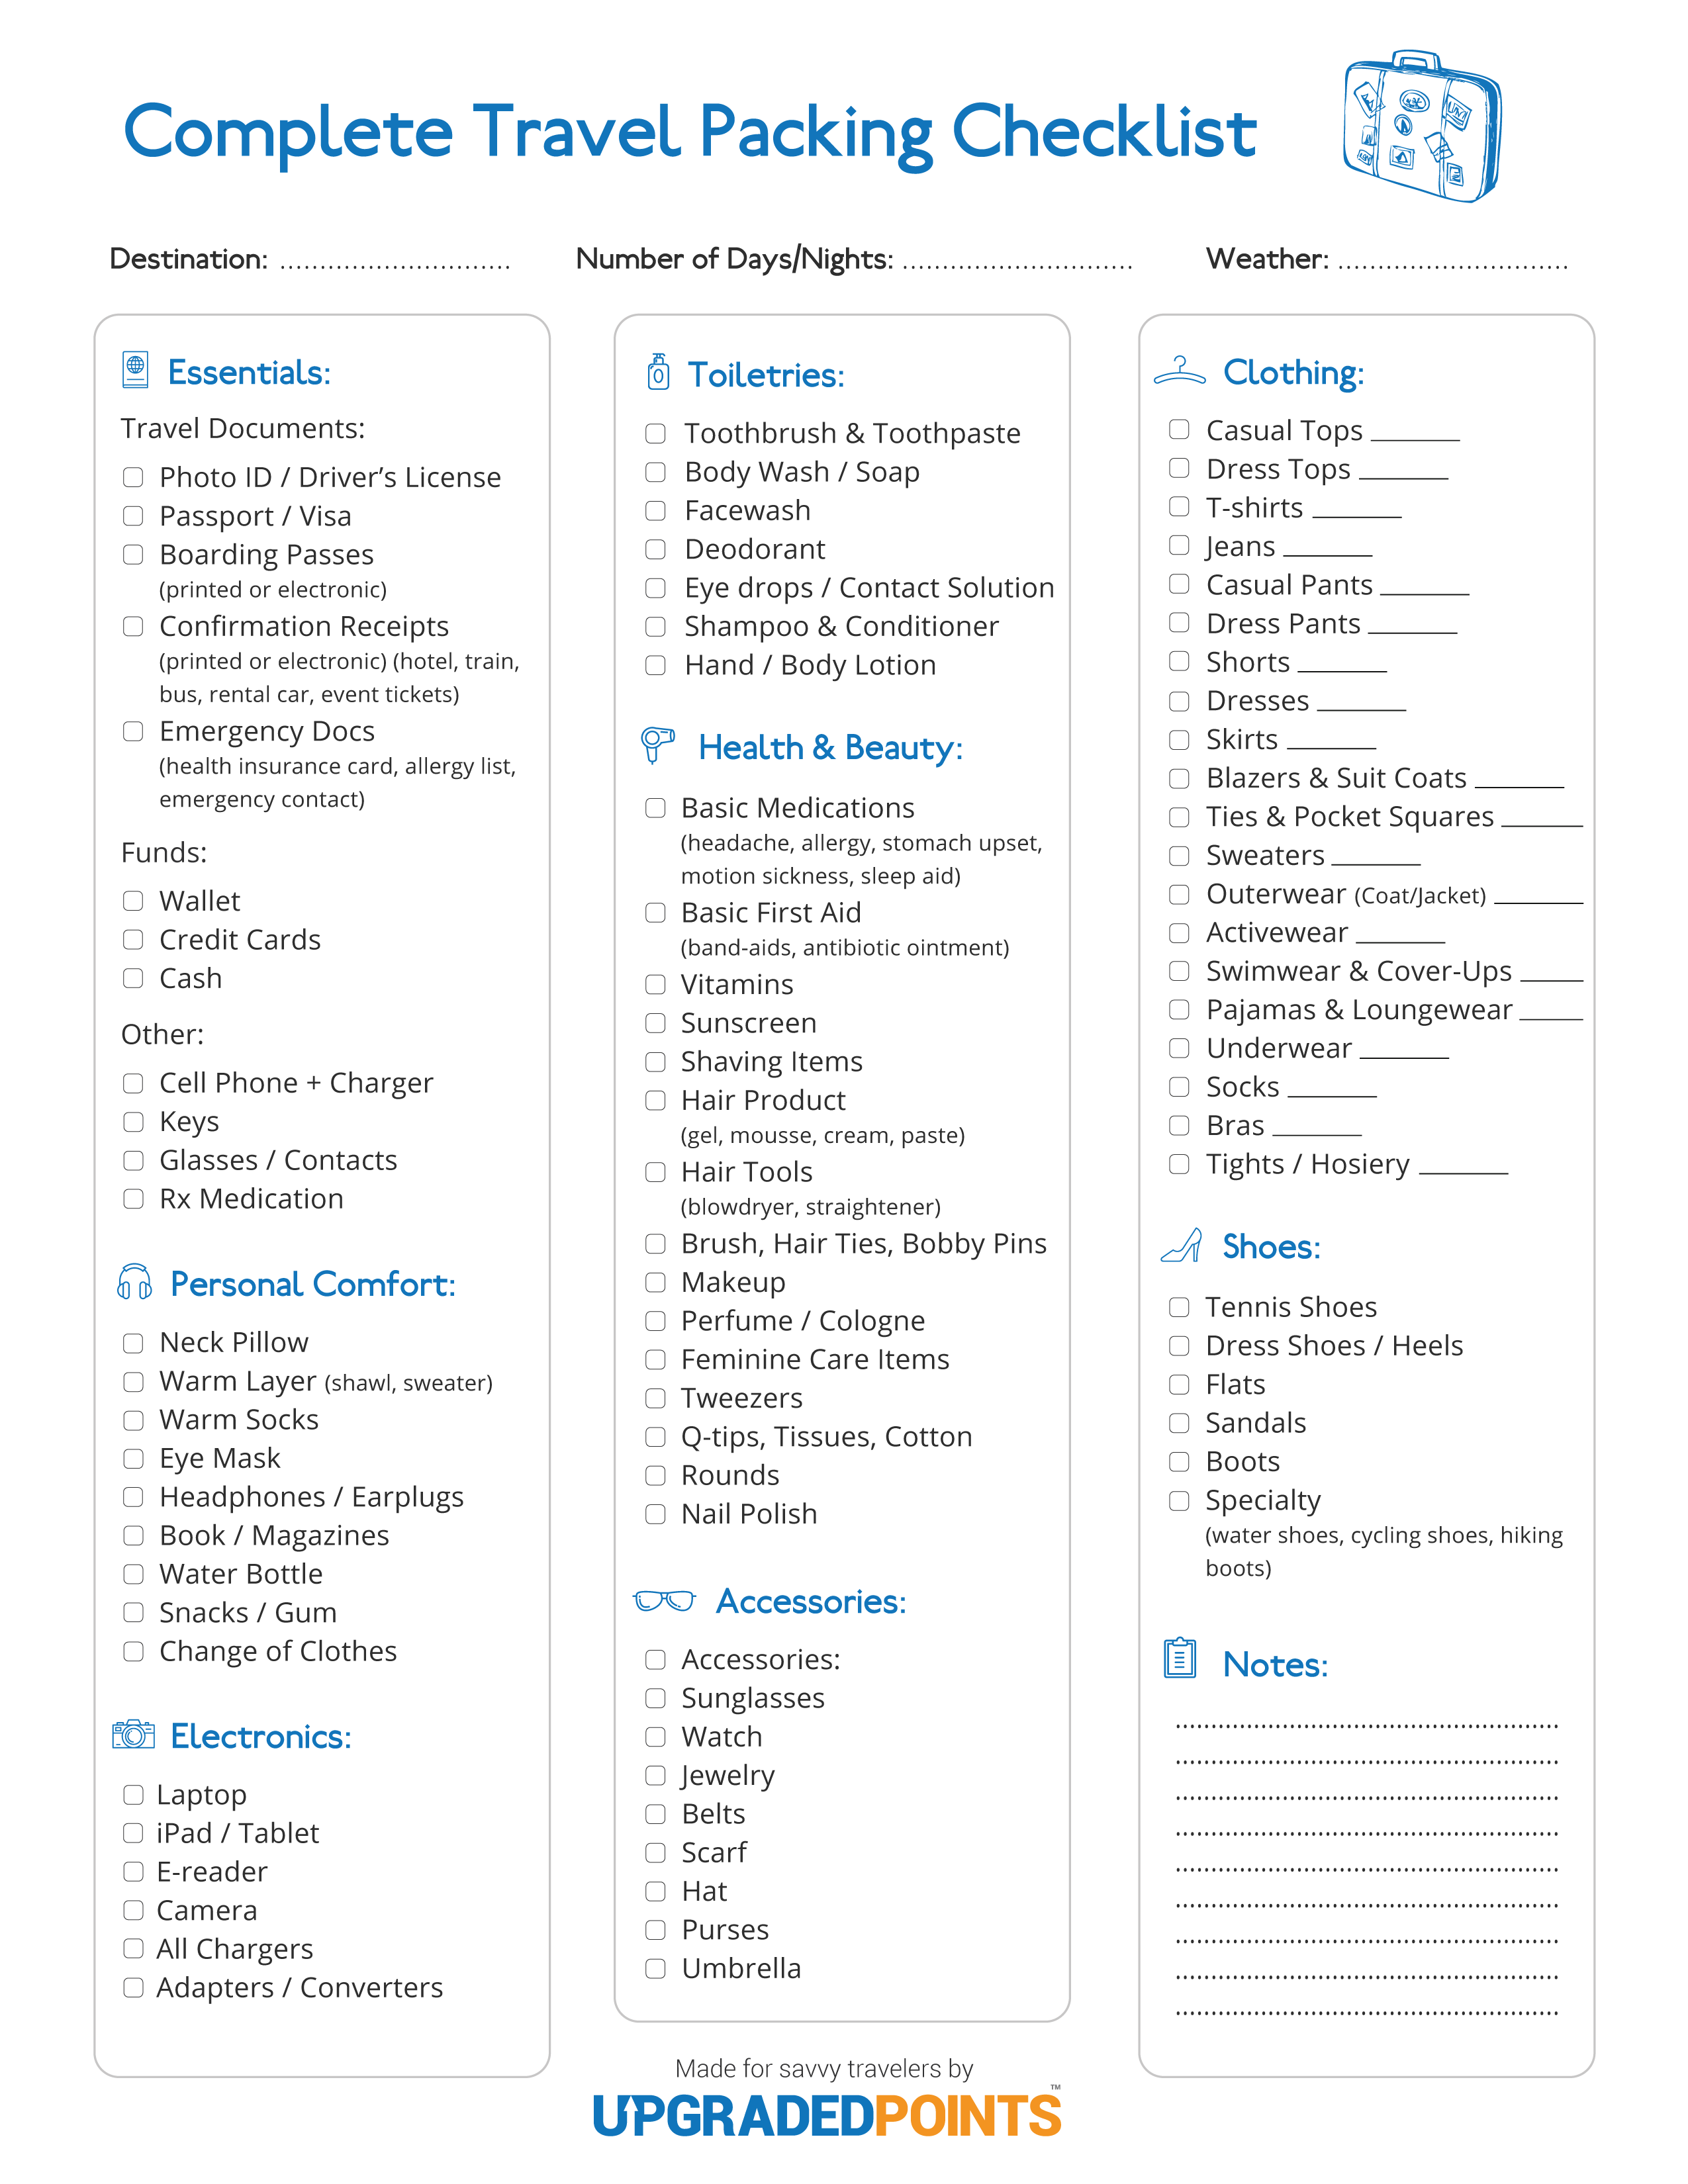 Trip Packing List Template from upgradedpoints.com